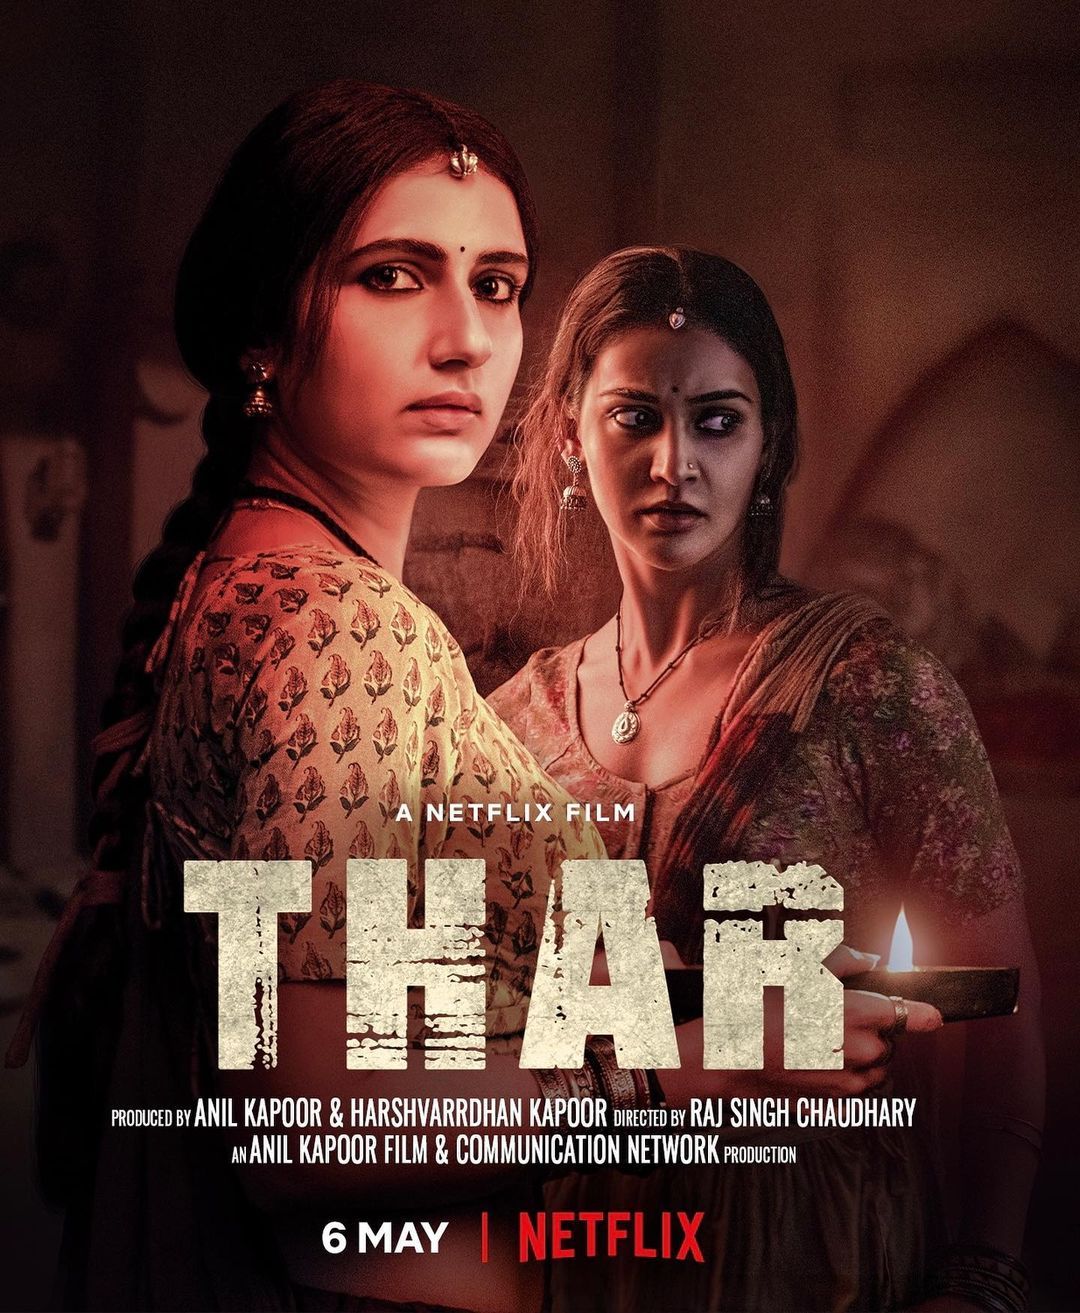 Mukti Mohan in the poster of her Netflix film Thar